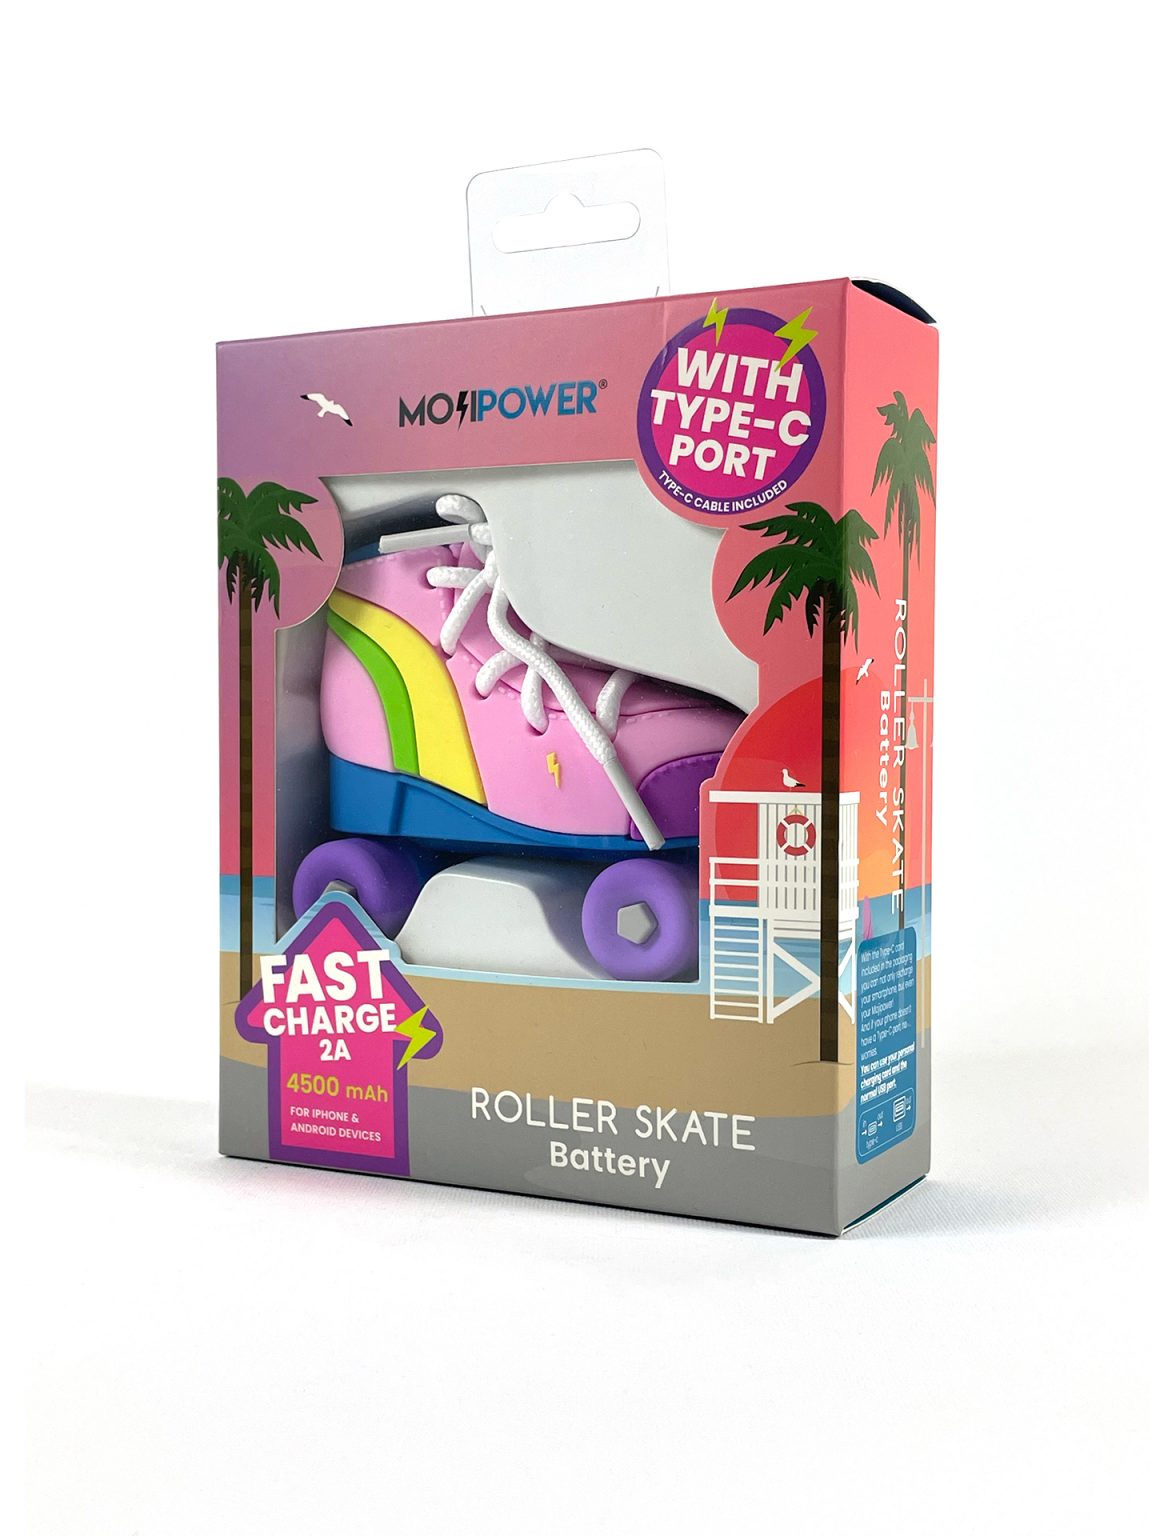 Roller Skate Power Bank Phone Charger